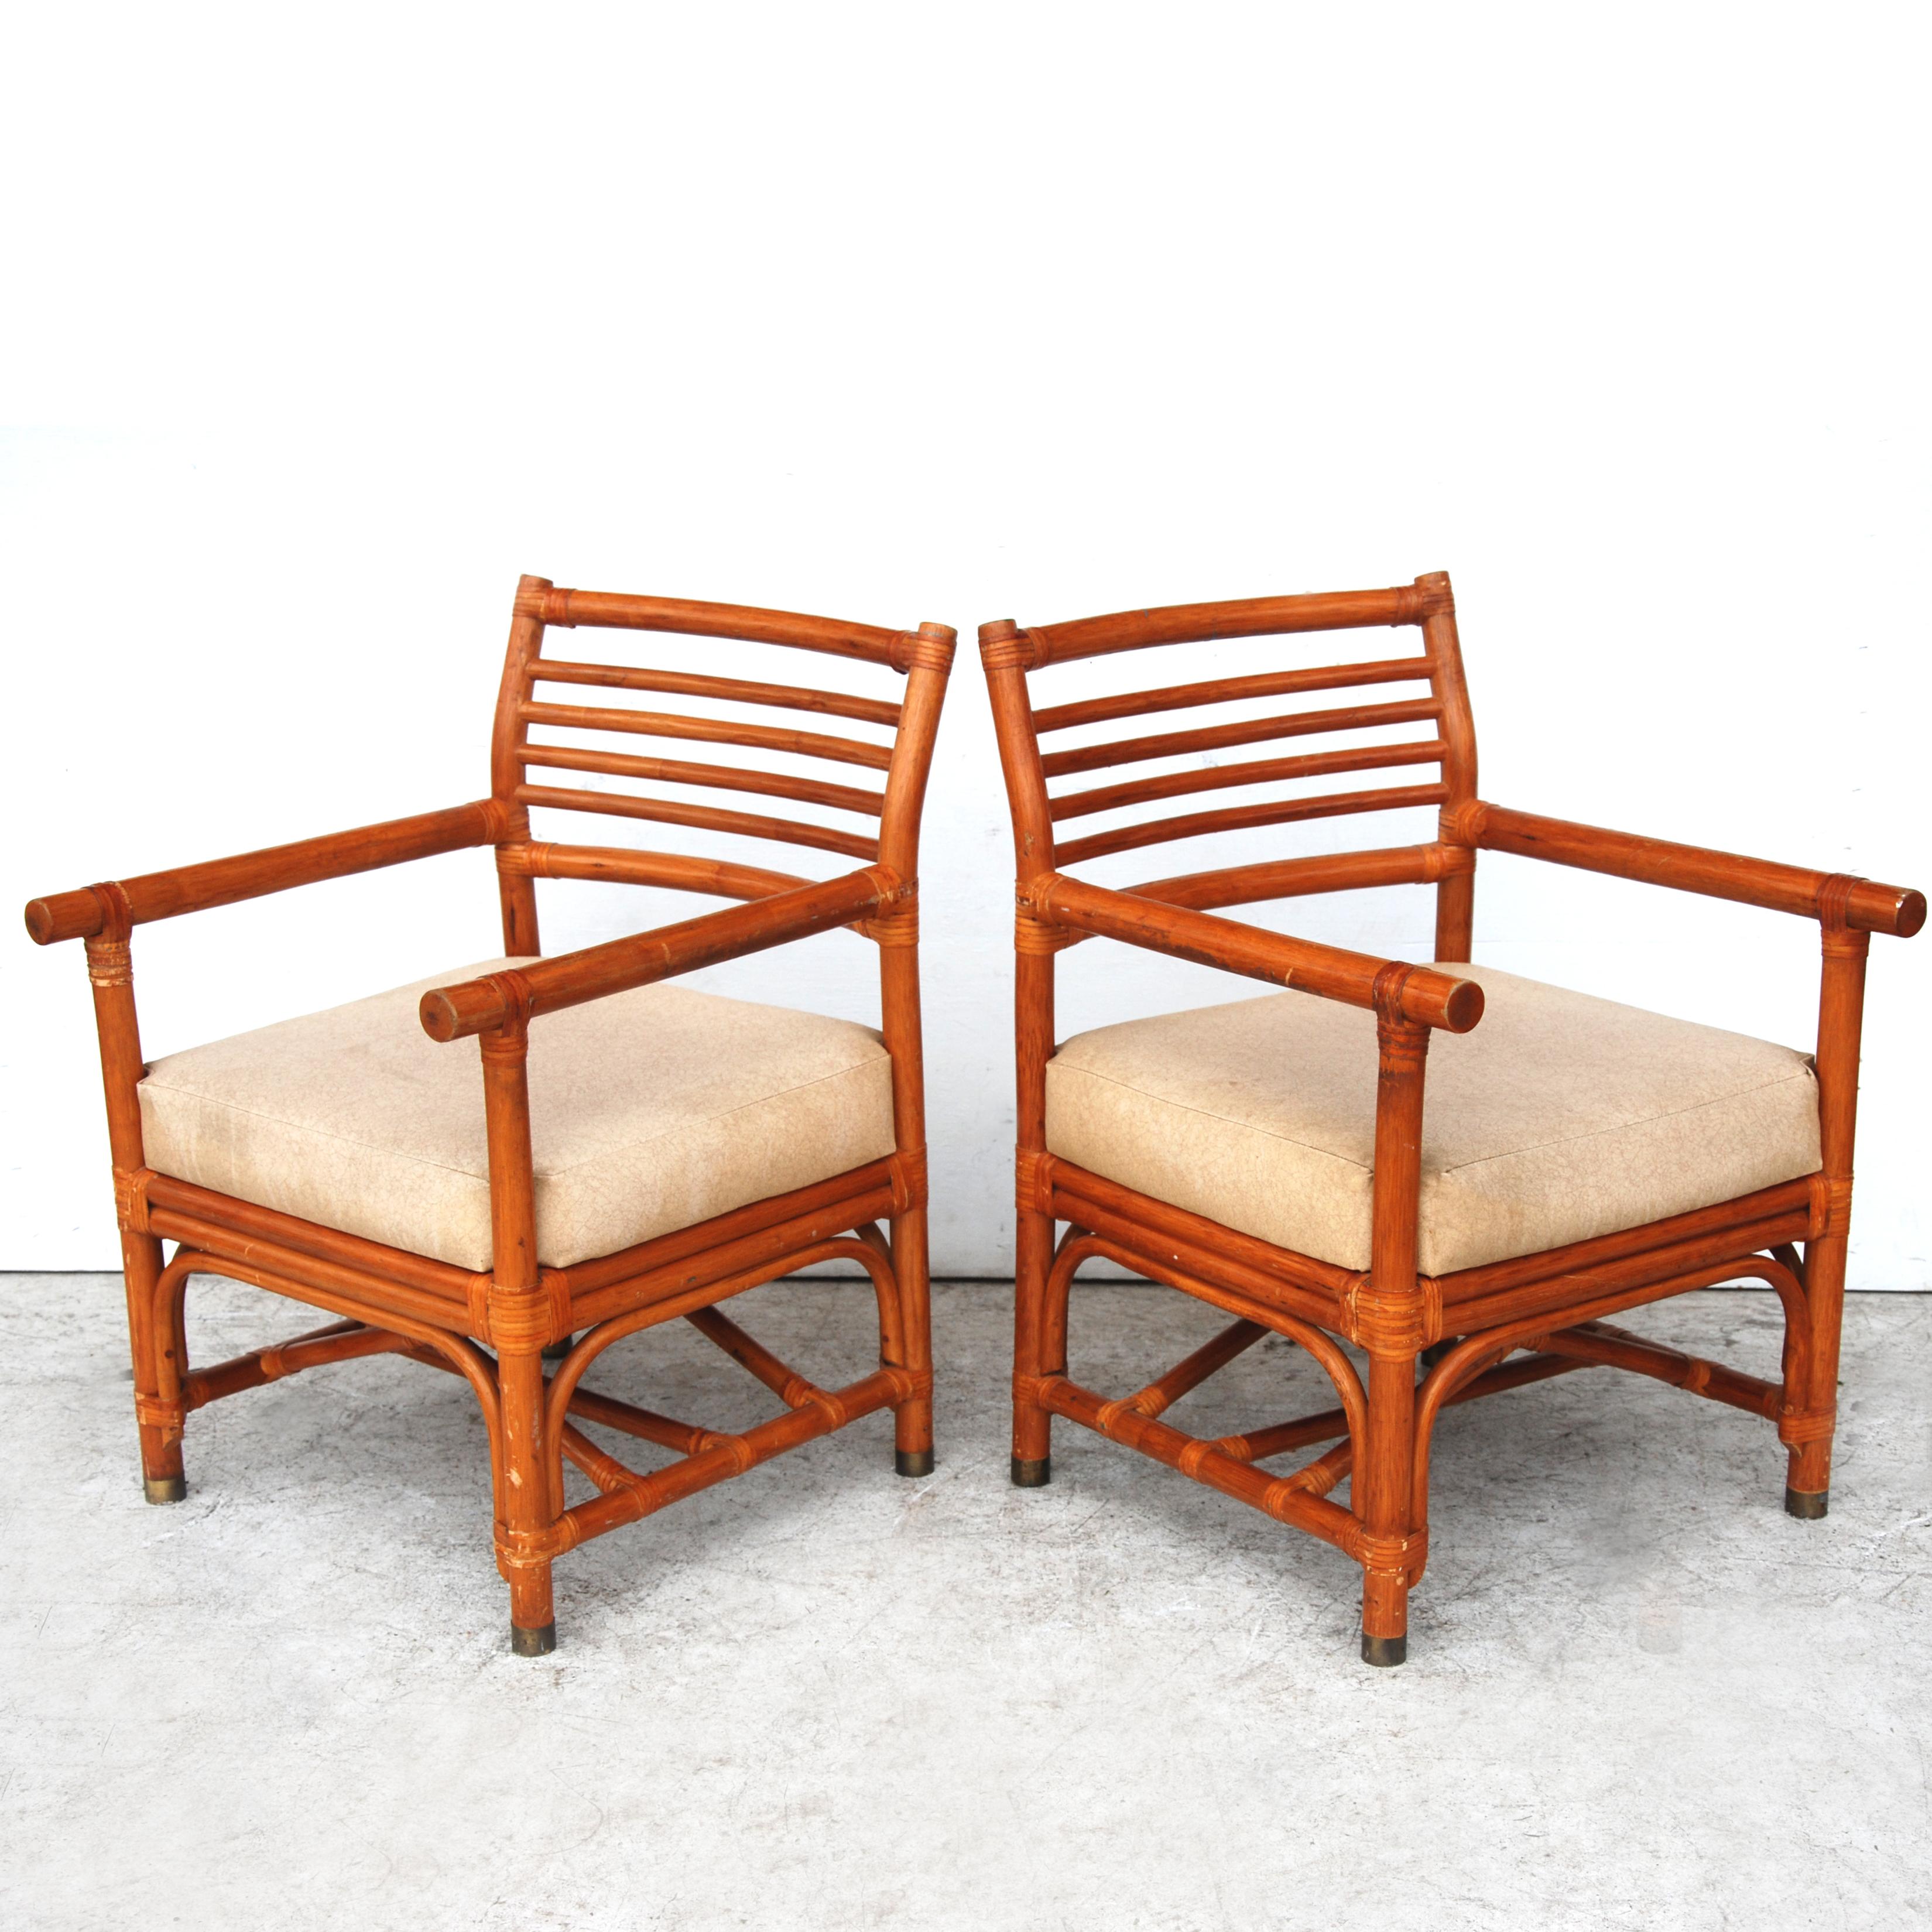 Bryan Ashley is a leader and innovator of hospitality industry furniture, custom hospitality furniture, contract furniture, upholstered furniture and more. 


Pair of rattan lounge chairs by Bryan Ashley 
 
2 rattan lounge chairs with comfortable,